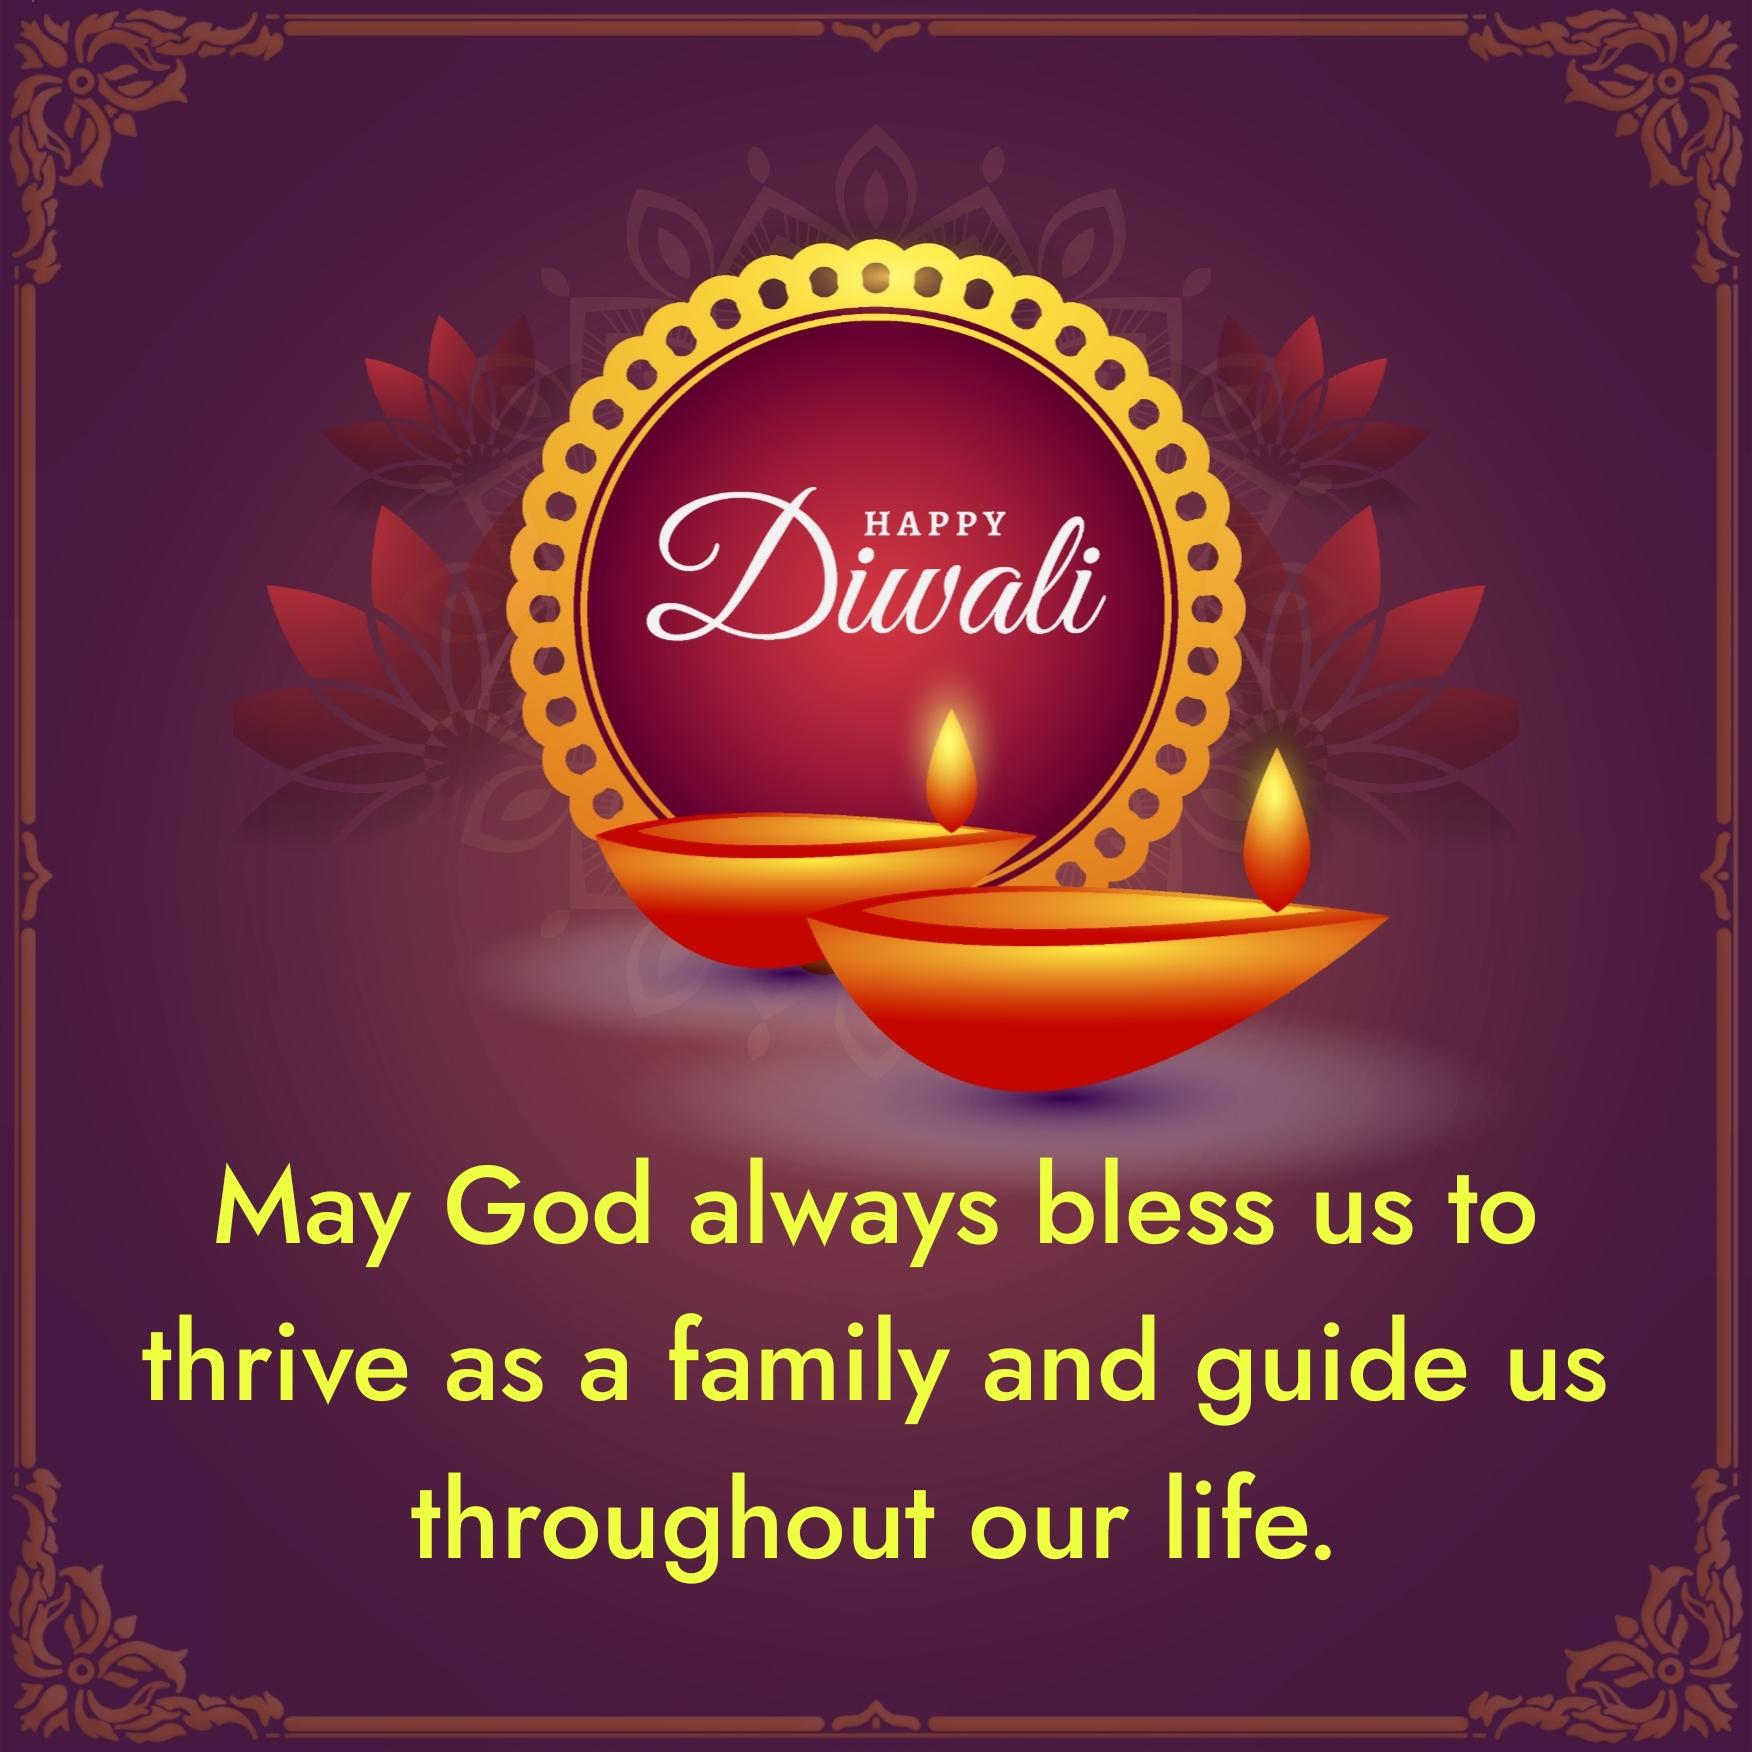 May God always bless us to thrive as a family